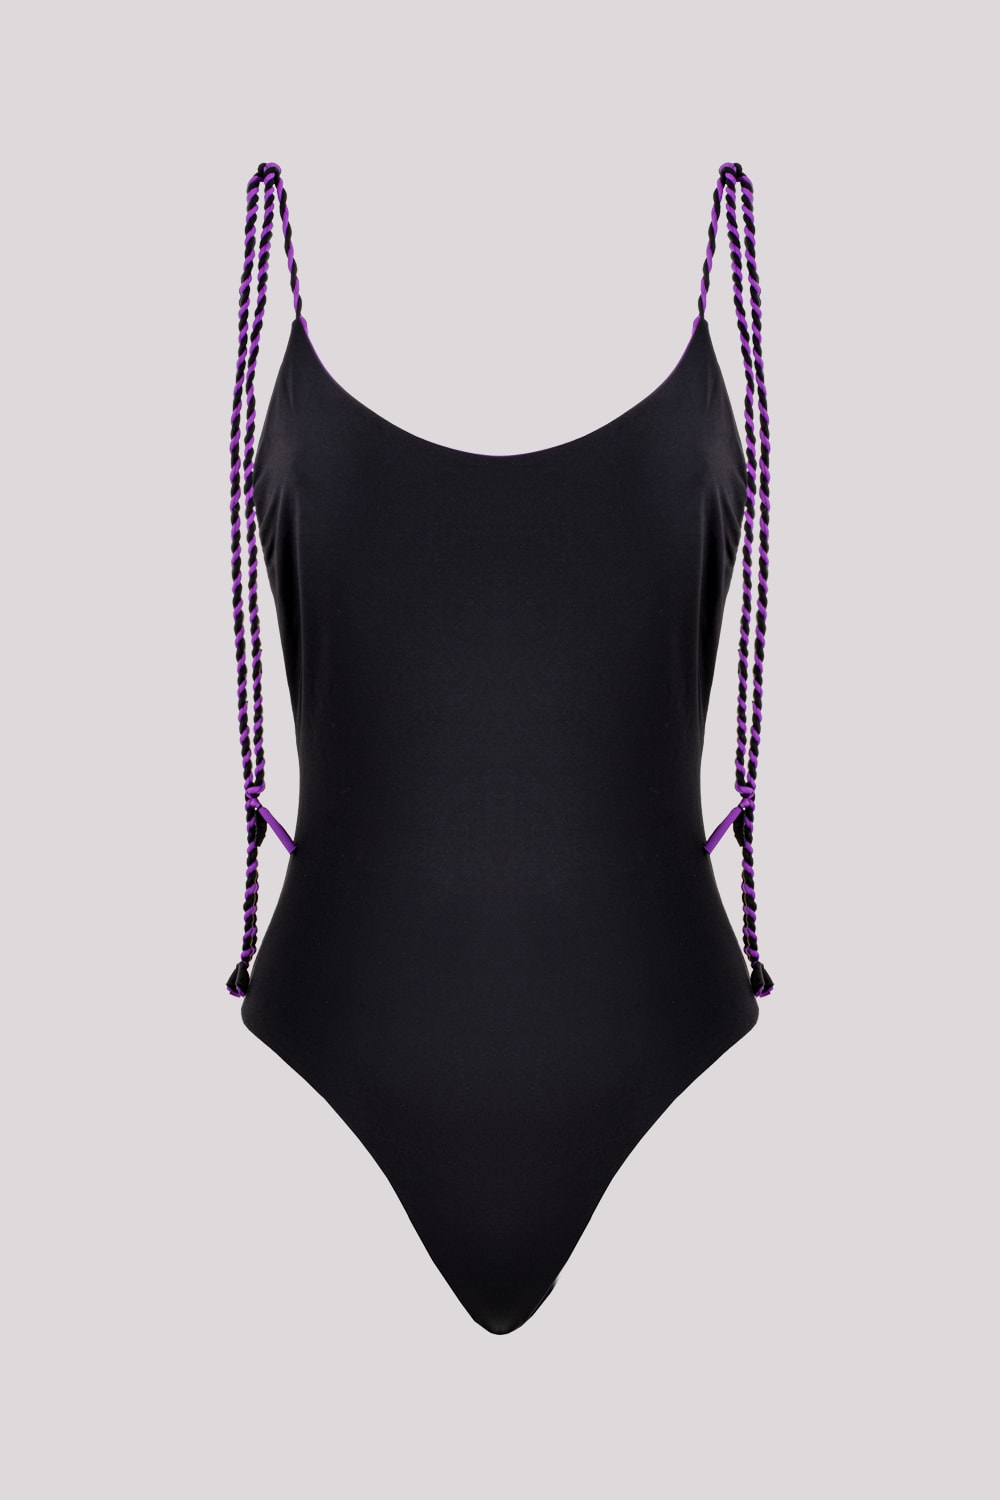 Marion Zimet Reversible One-piece Swimsuit With Adjustable Braided Side Lace